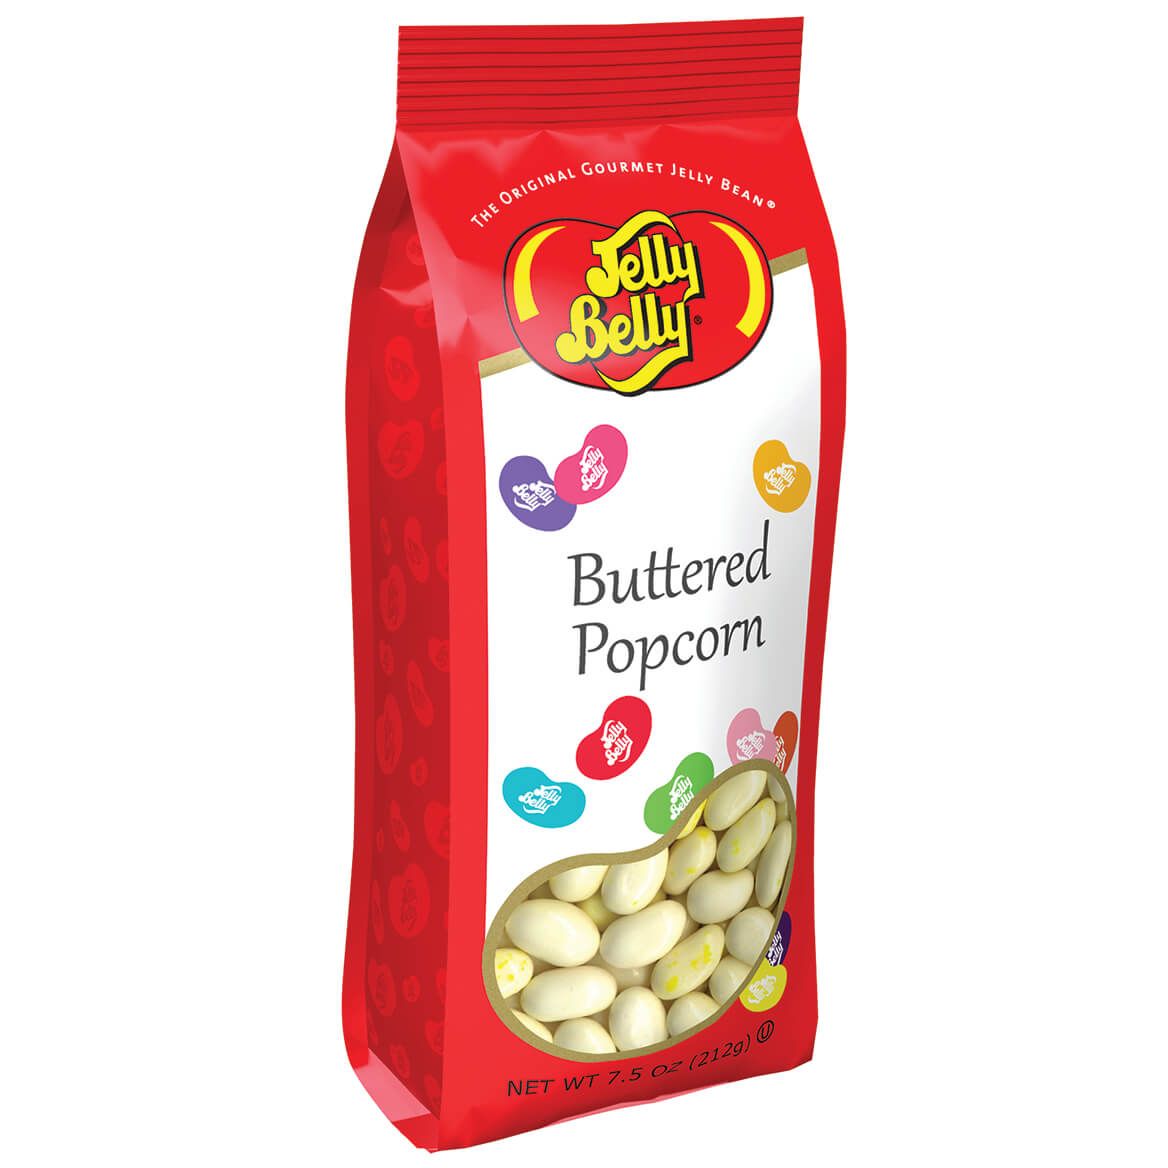 Jelly Belly® Buttered Popcorn Beans, 7.5 oz. + '-' + 375955